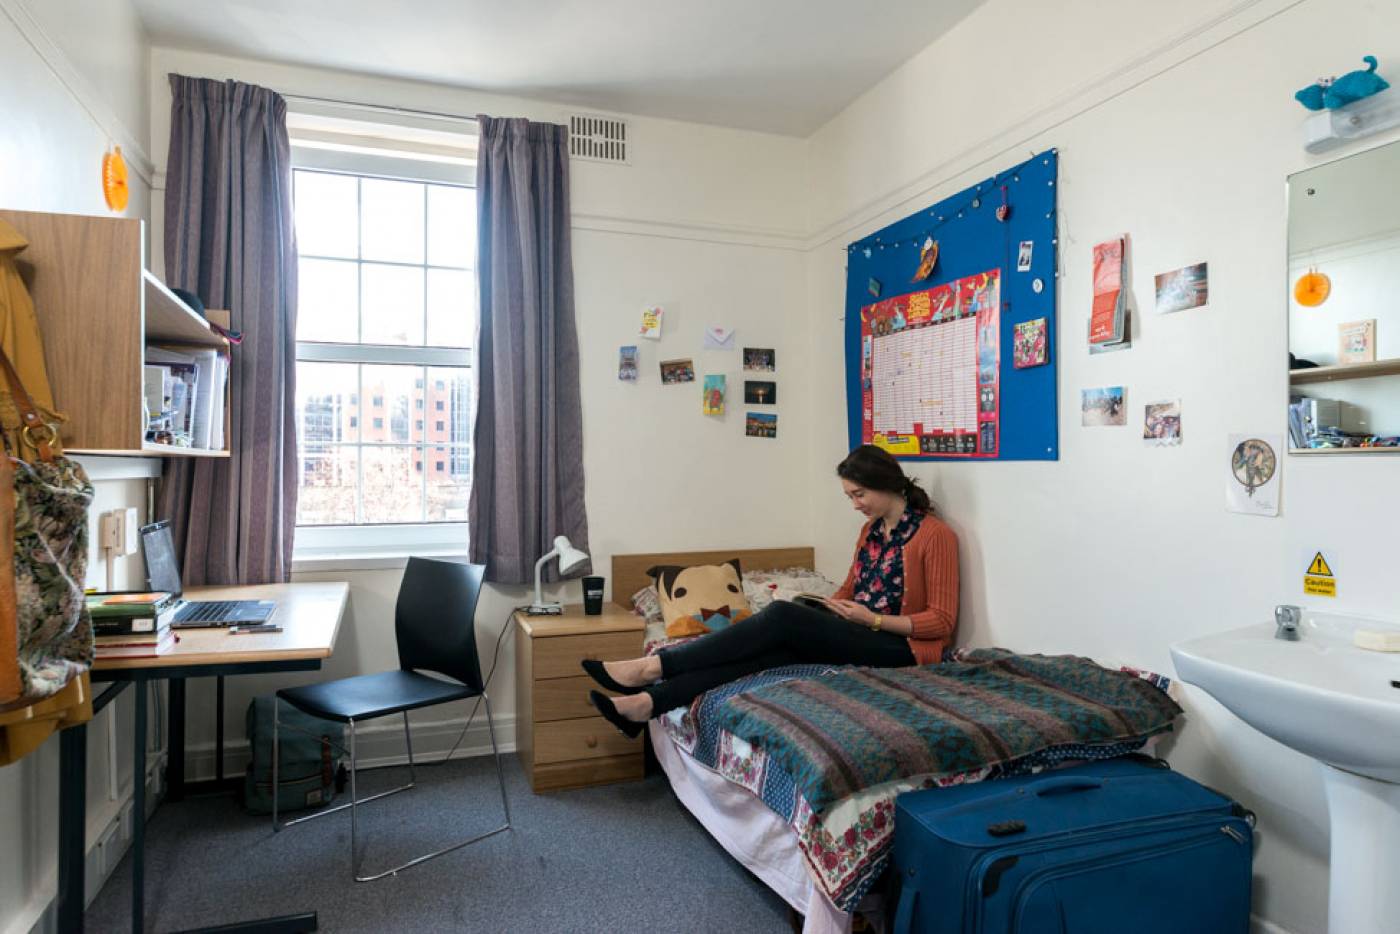 Self-catered accommodation | UCL Student Accommodation - UCL - London's